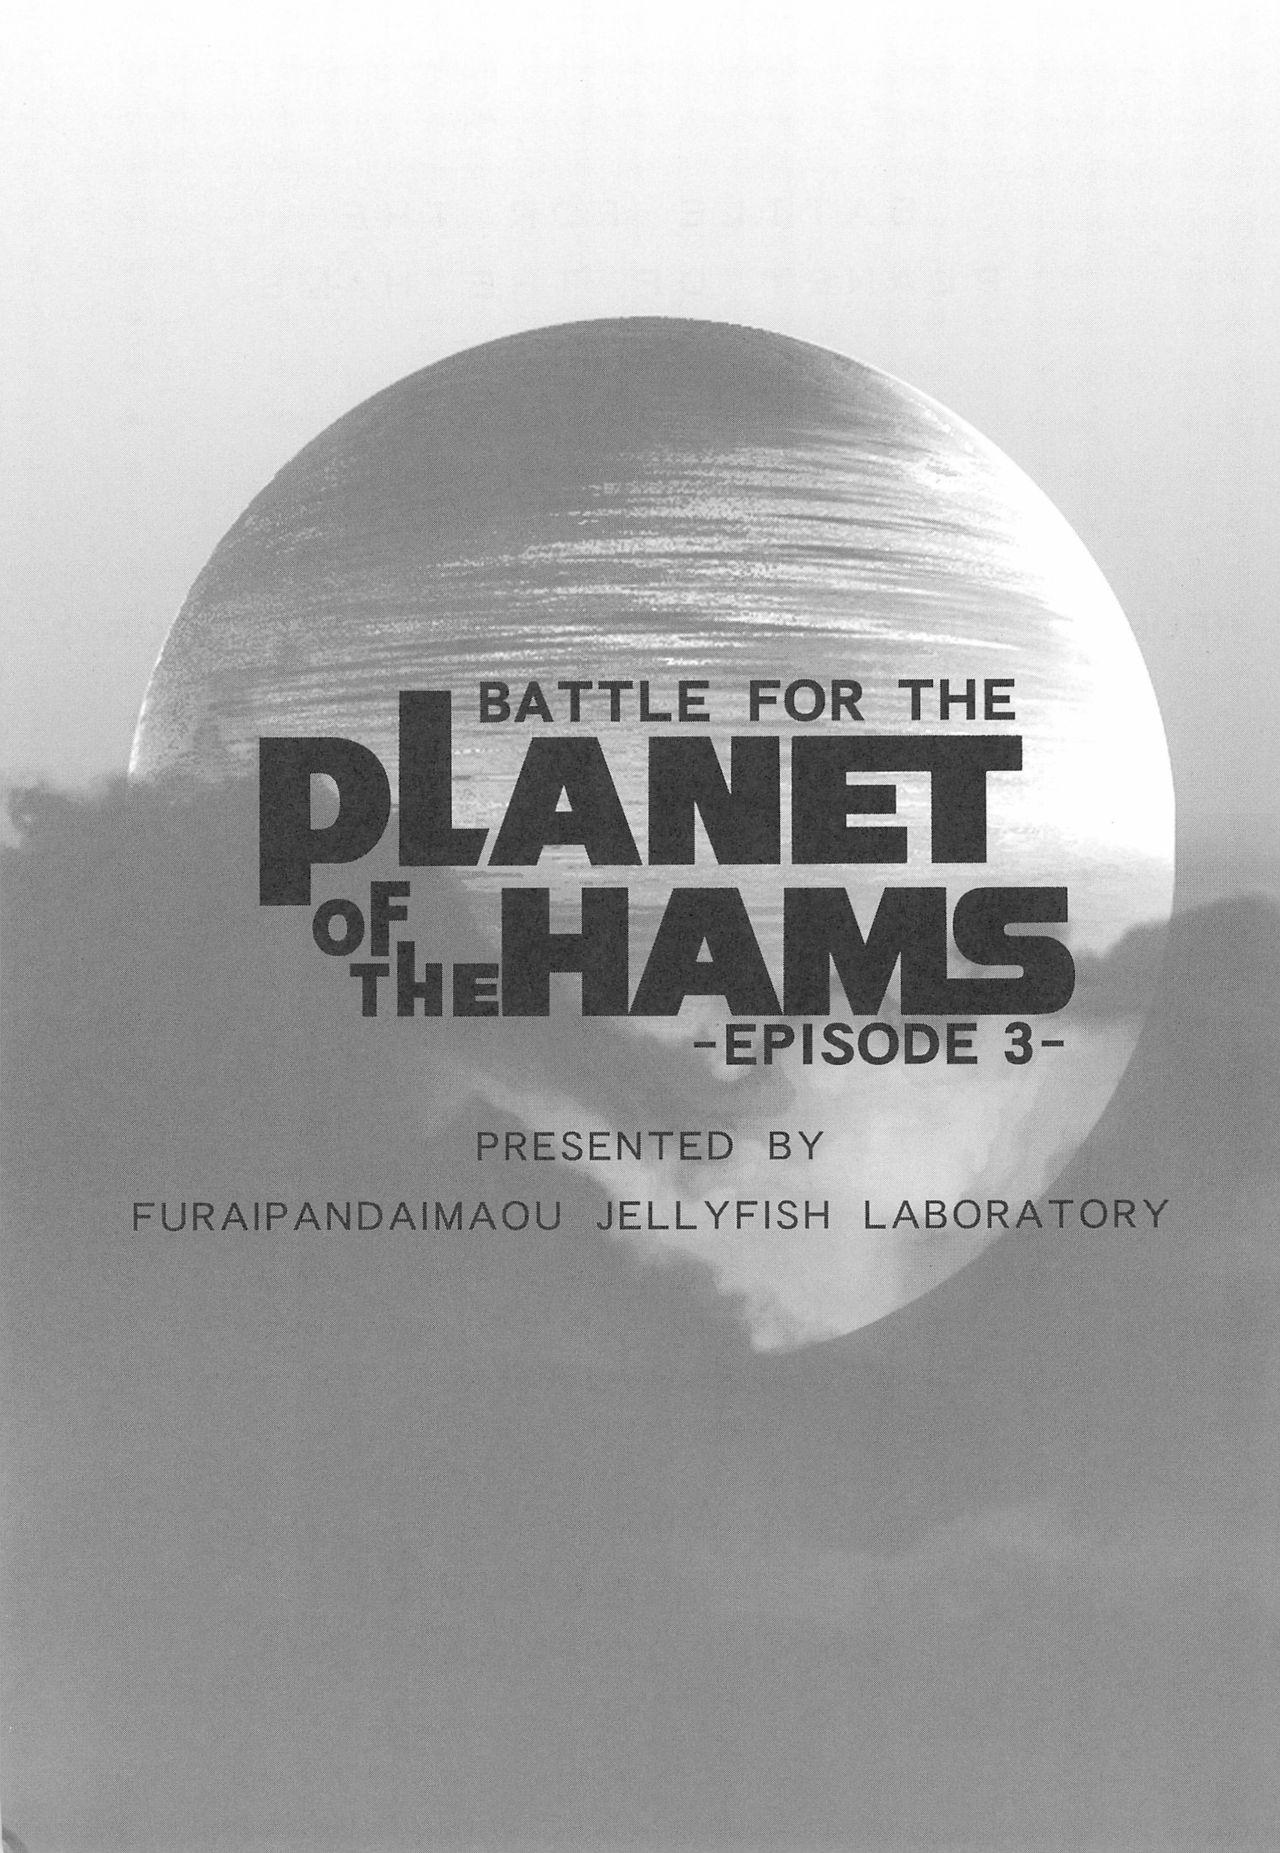 BATTLE FOR THE PLANET OF THE HAMS 2